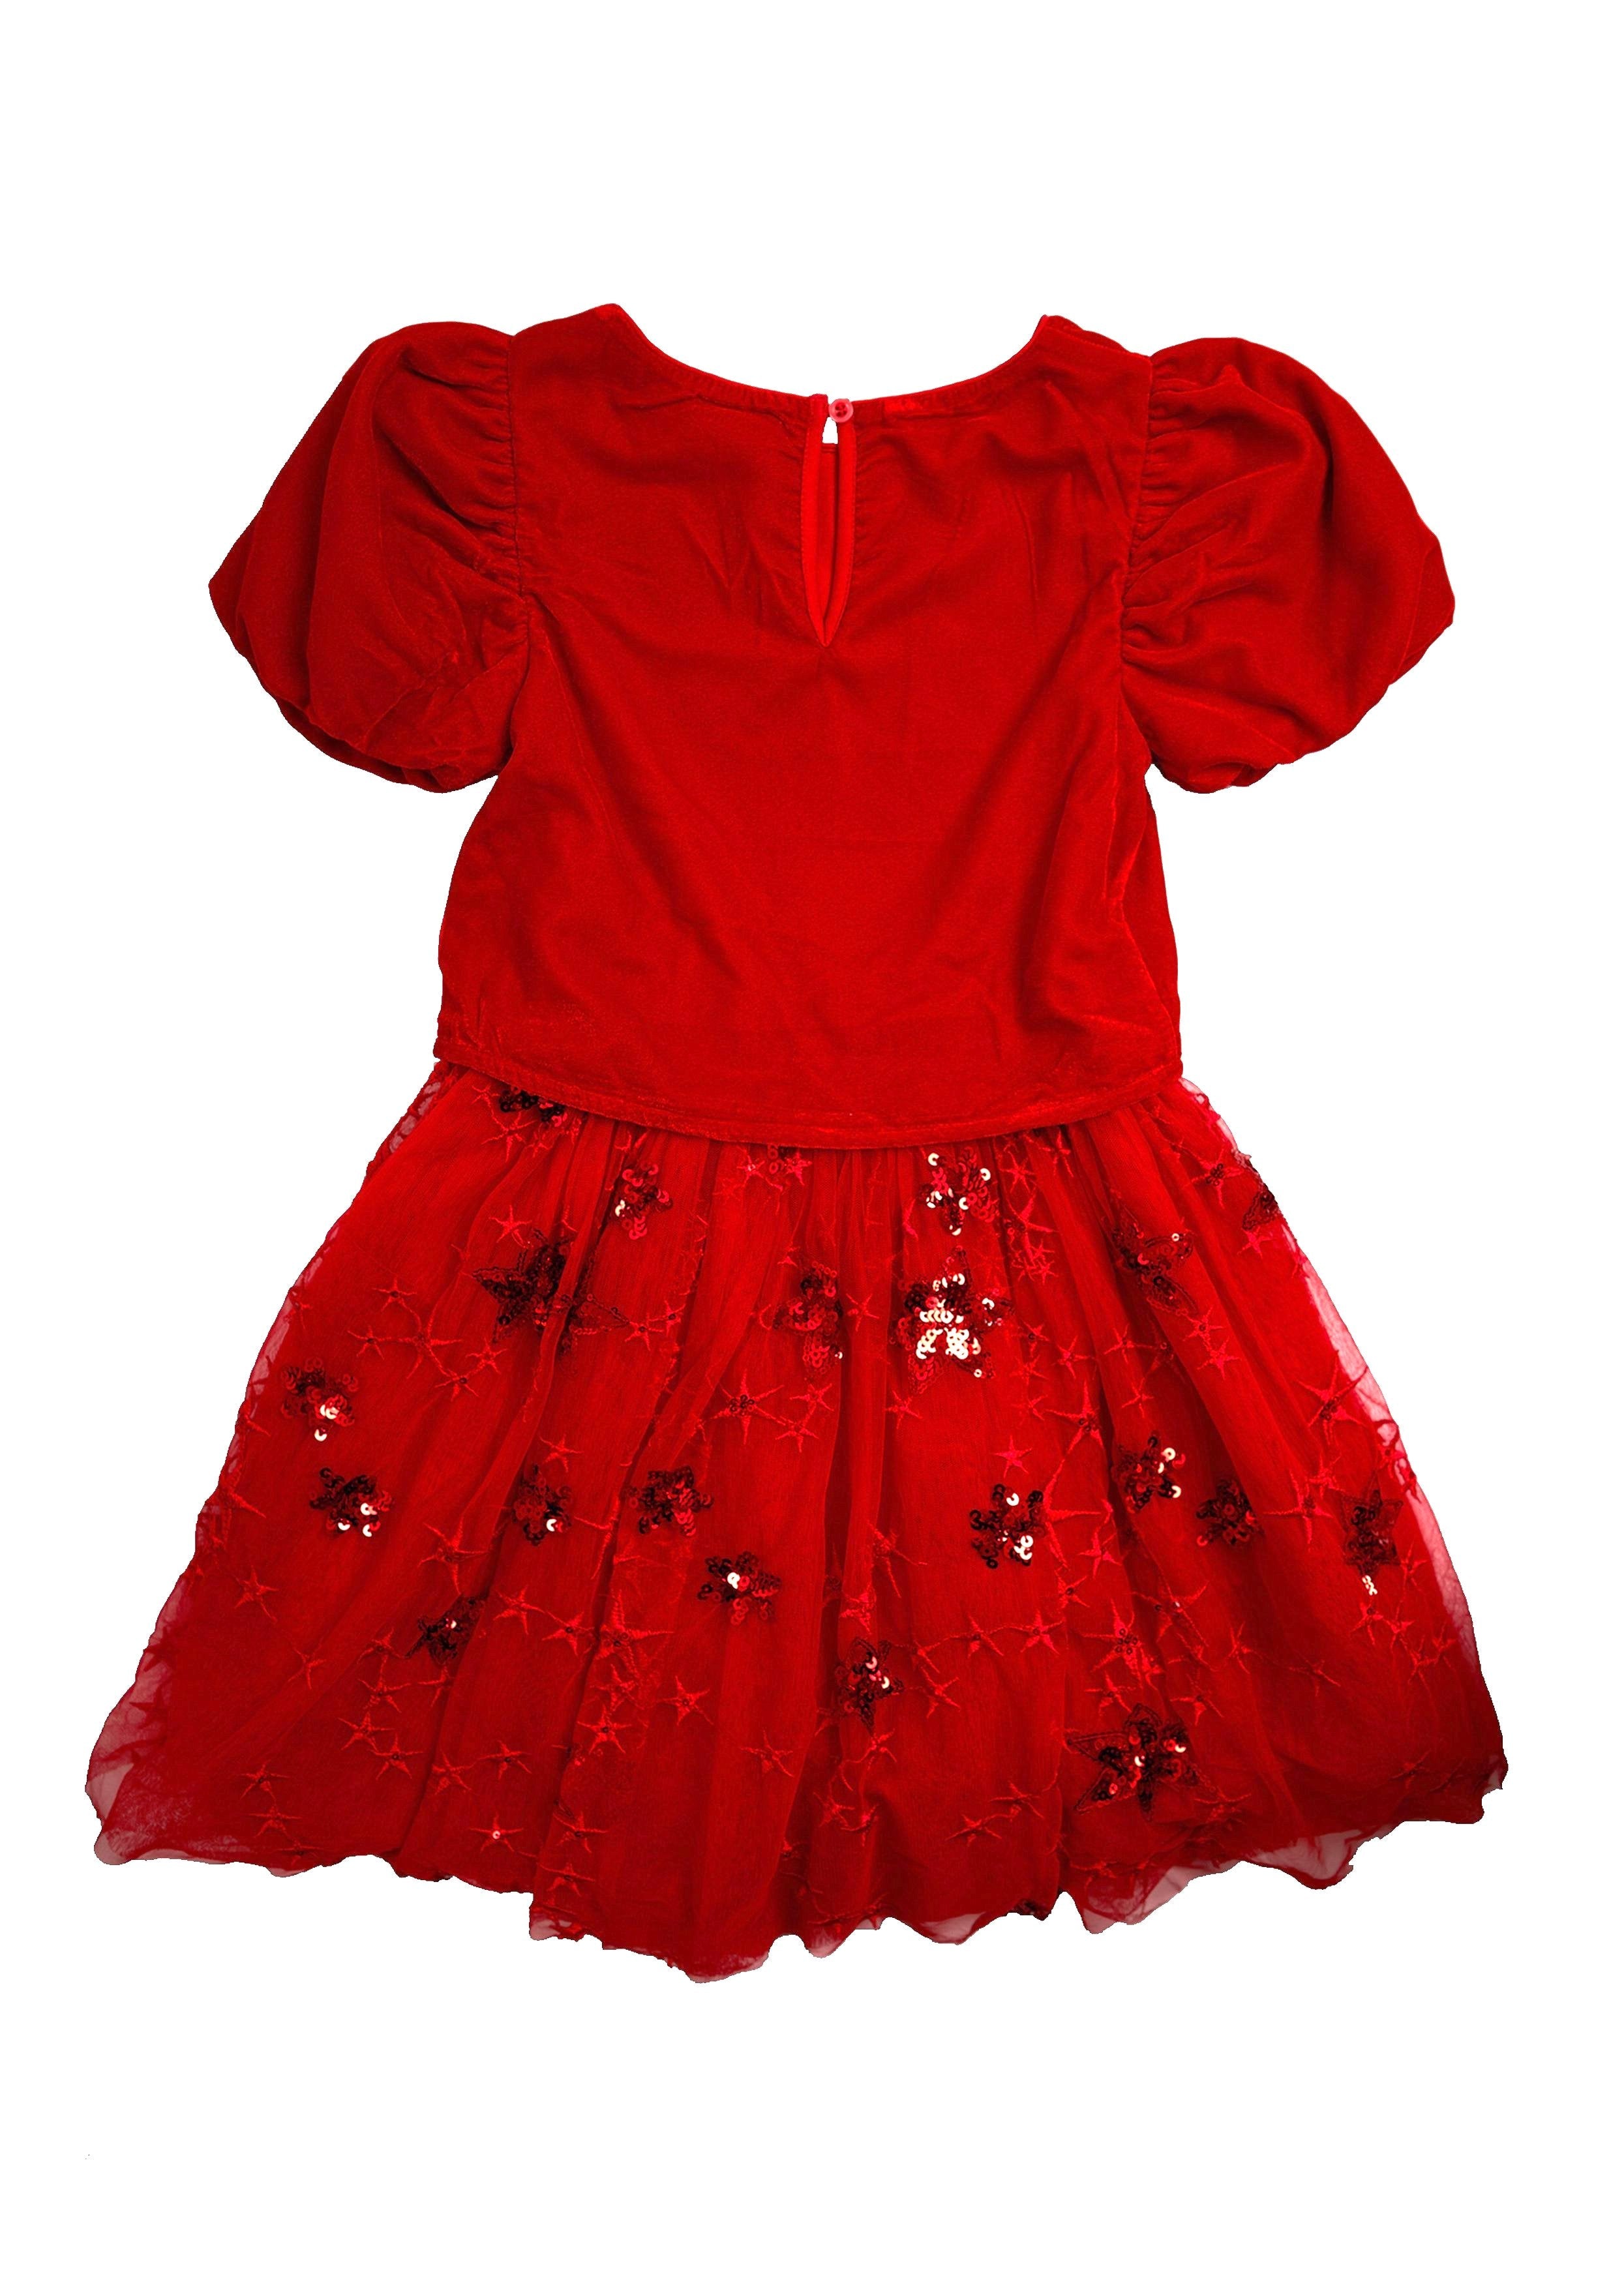 Girls Sequin Embellished Red Velvet Dress with Puff Sleeves